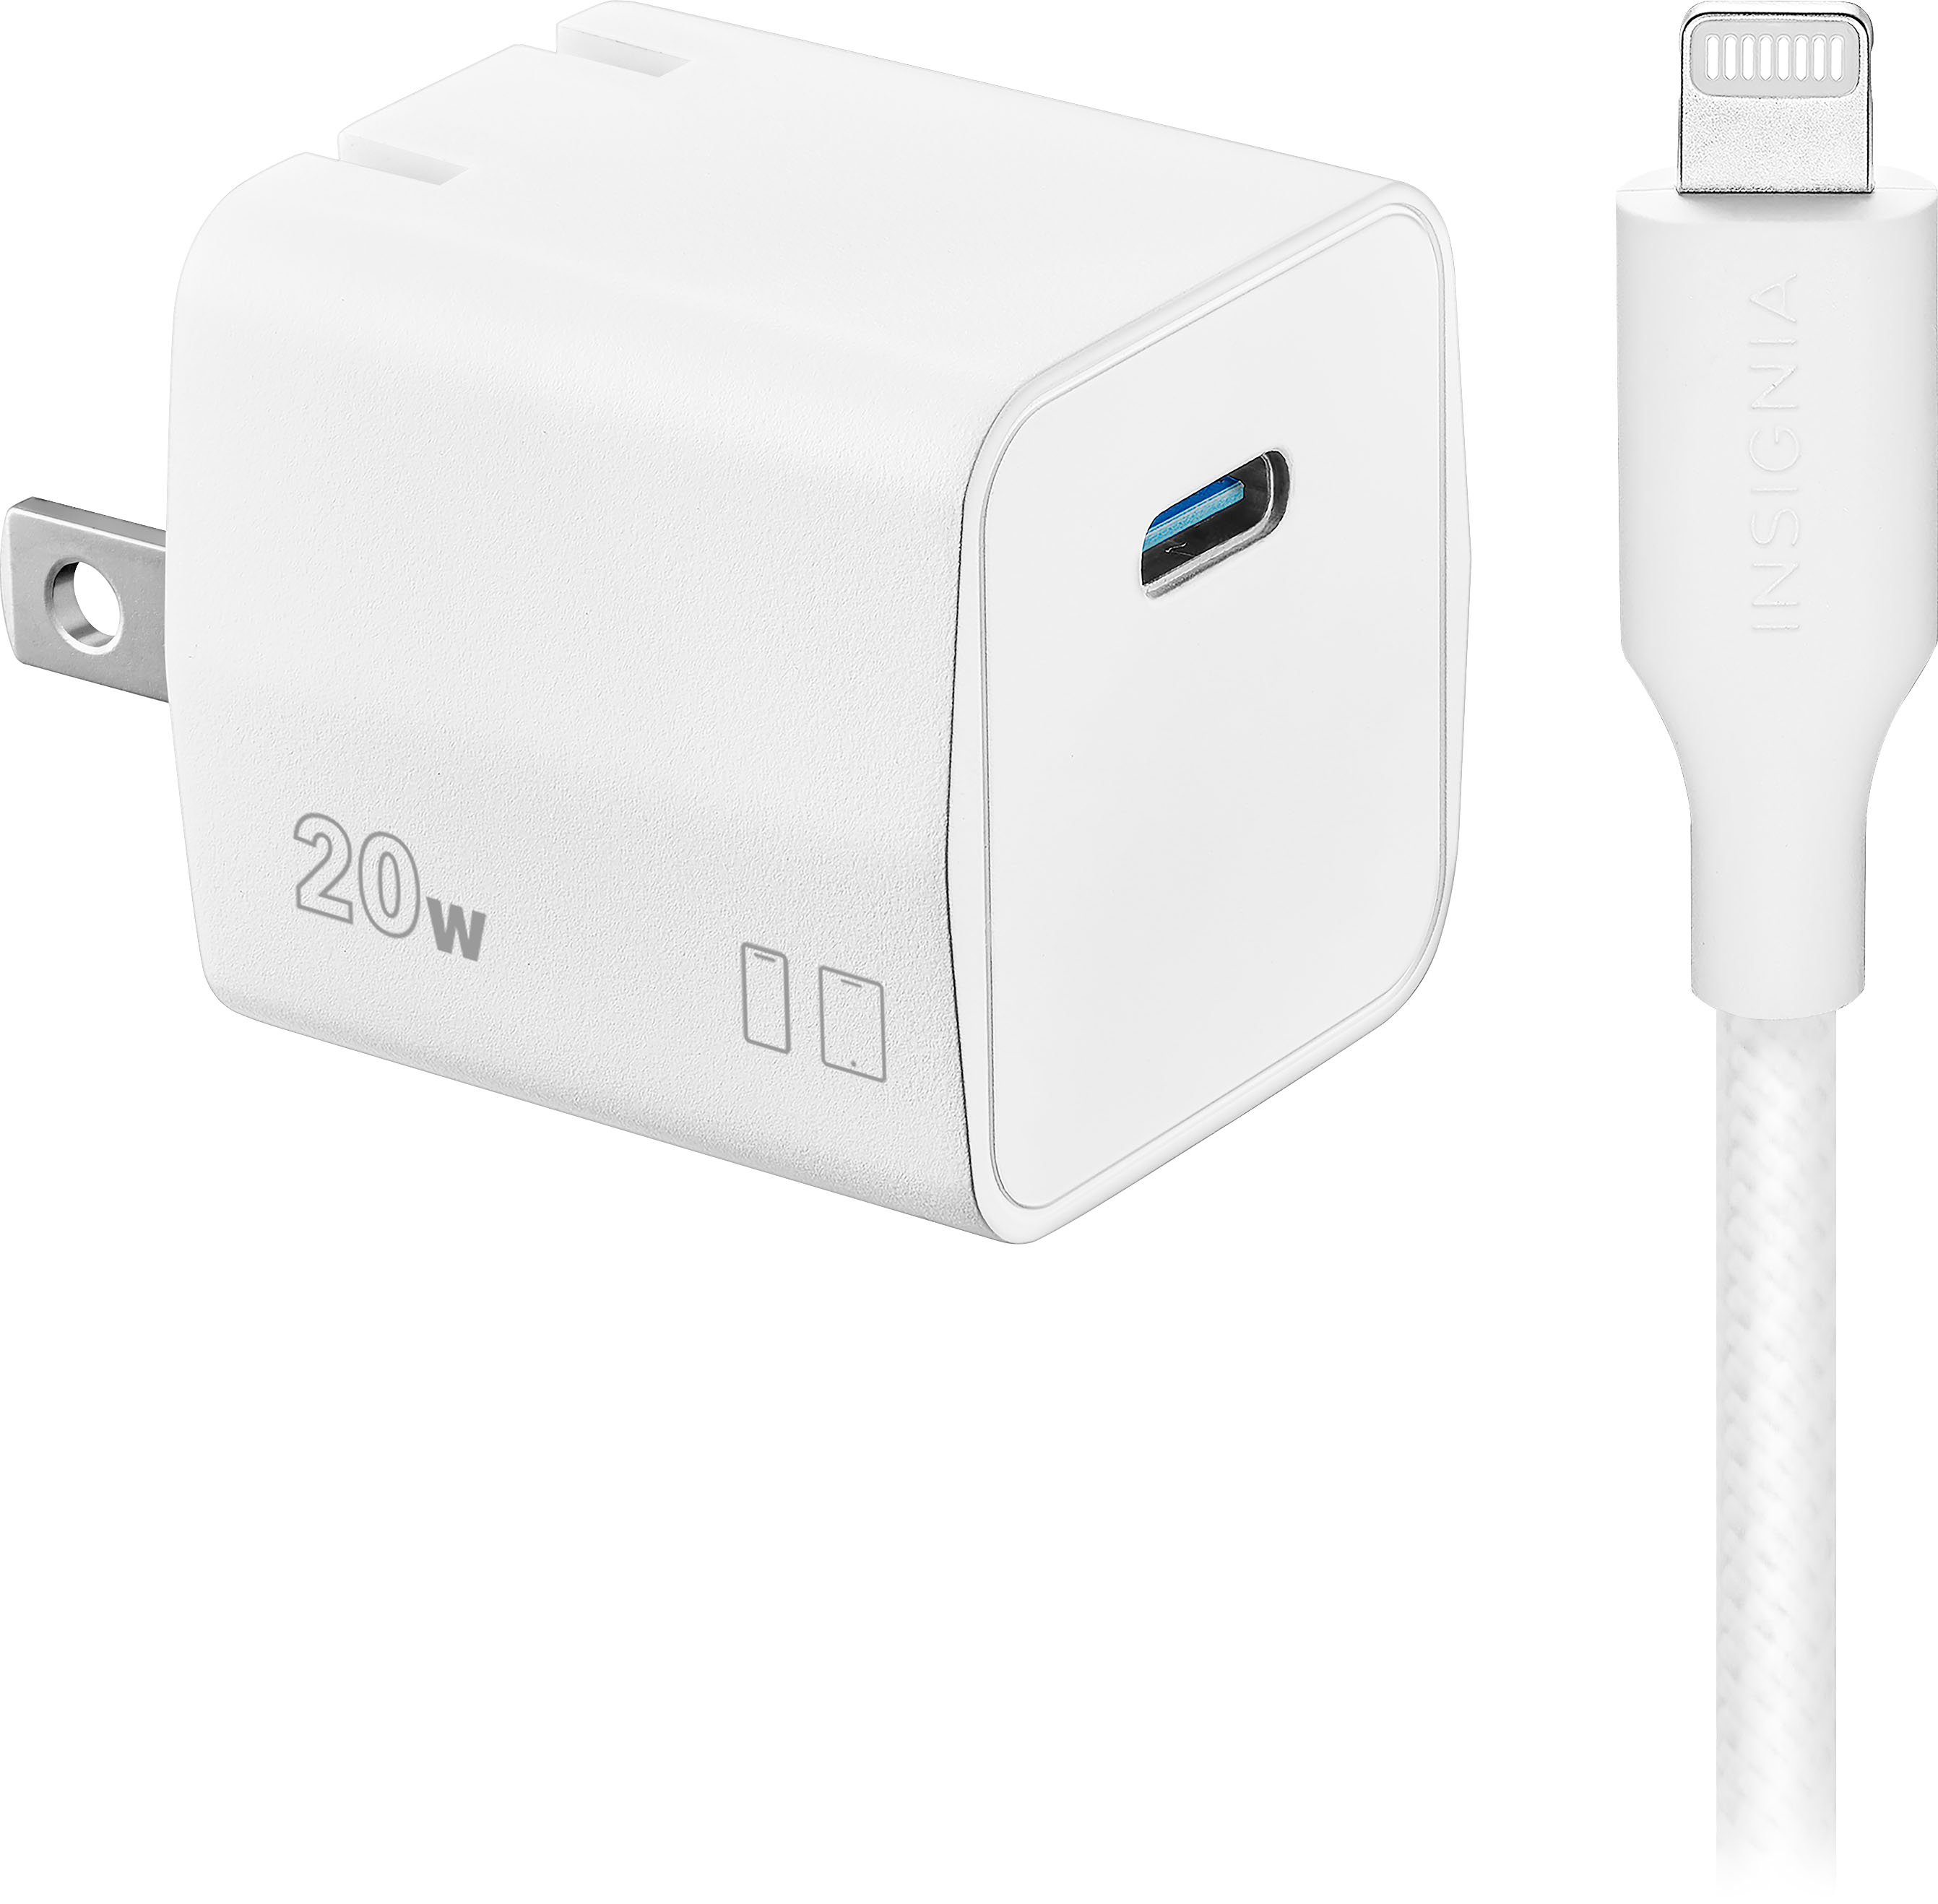  [MFI Certified] iPhone Charger Block USB C Fast Wall Plug with  6ft USB C to Lightning Cable for i Phone/14/13/12/11/pro/pro max/Air pods  pro/iPad air 3/min4 (White, 6FT 1 Pack) : Cell